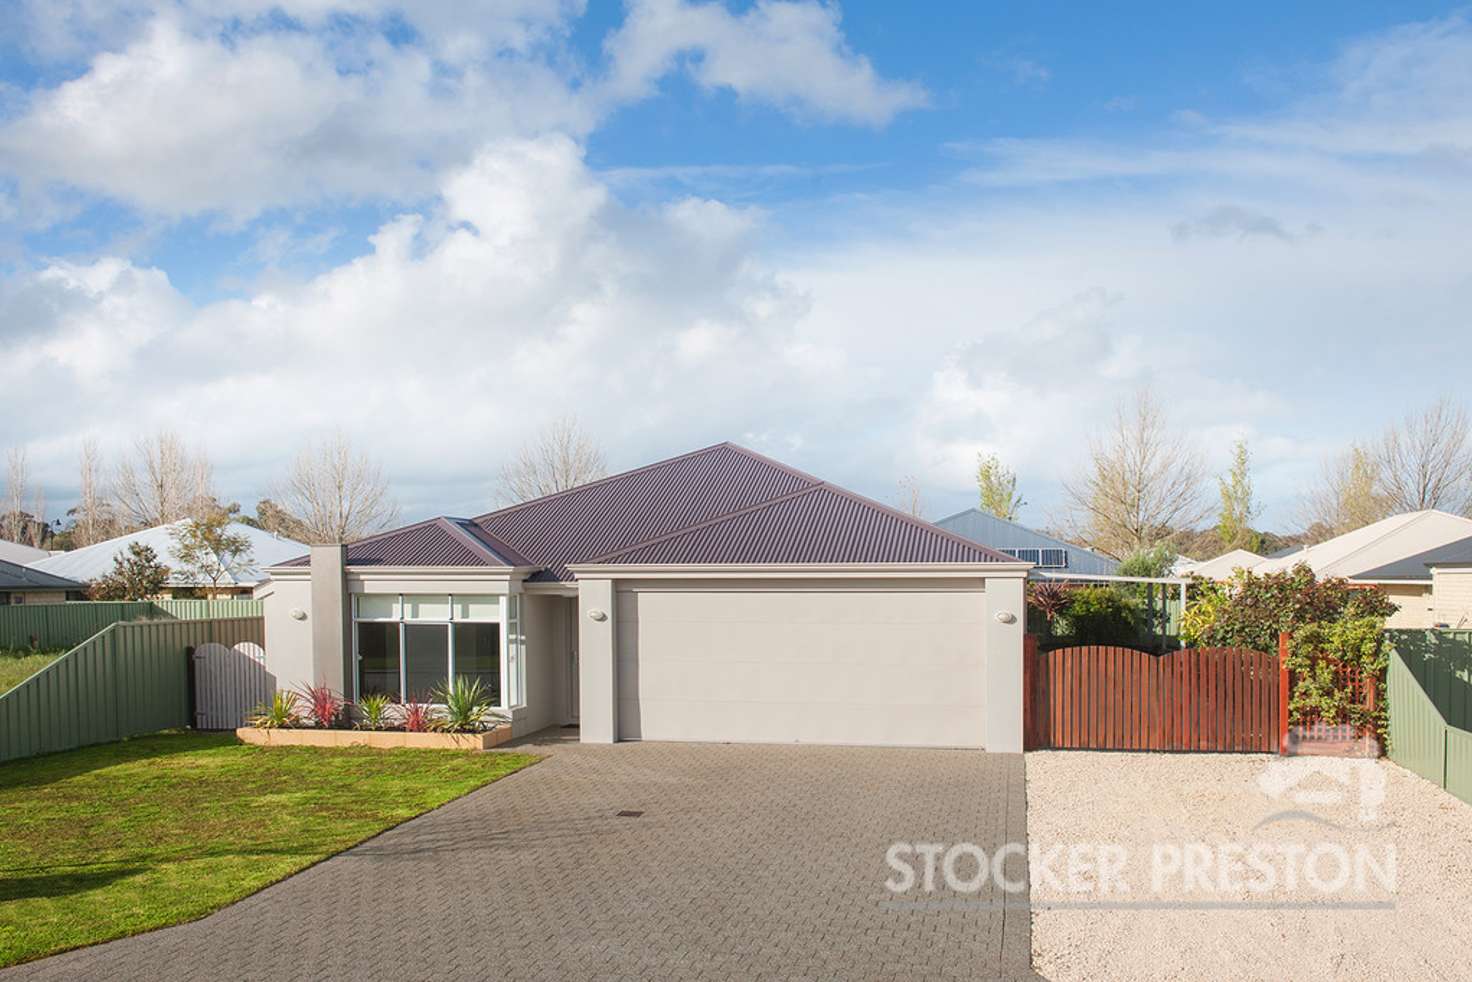 Main view of Homely house listing, 6 Milligan Way, Vasse WA 6280